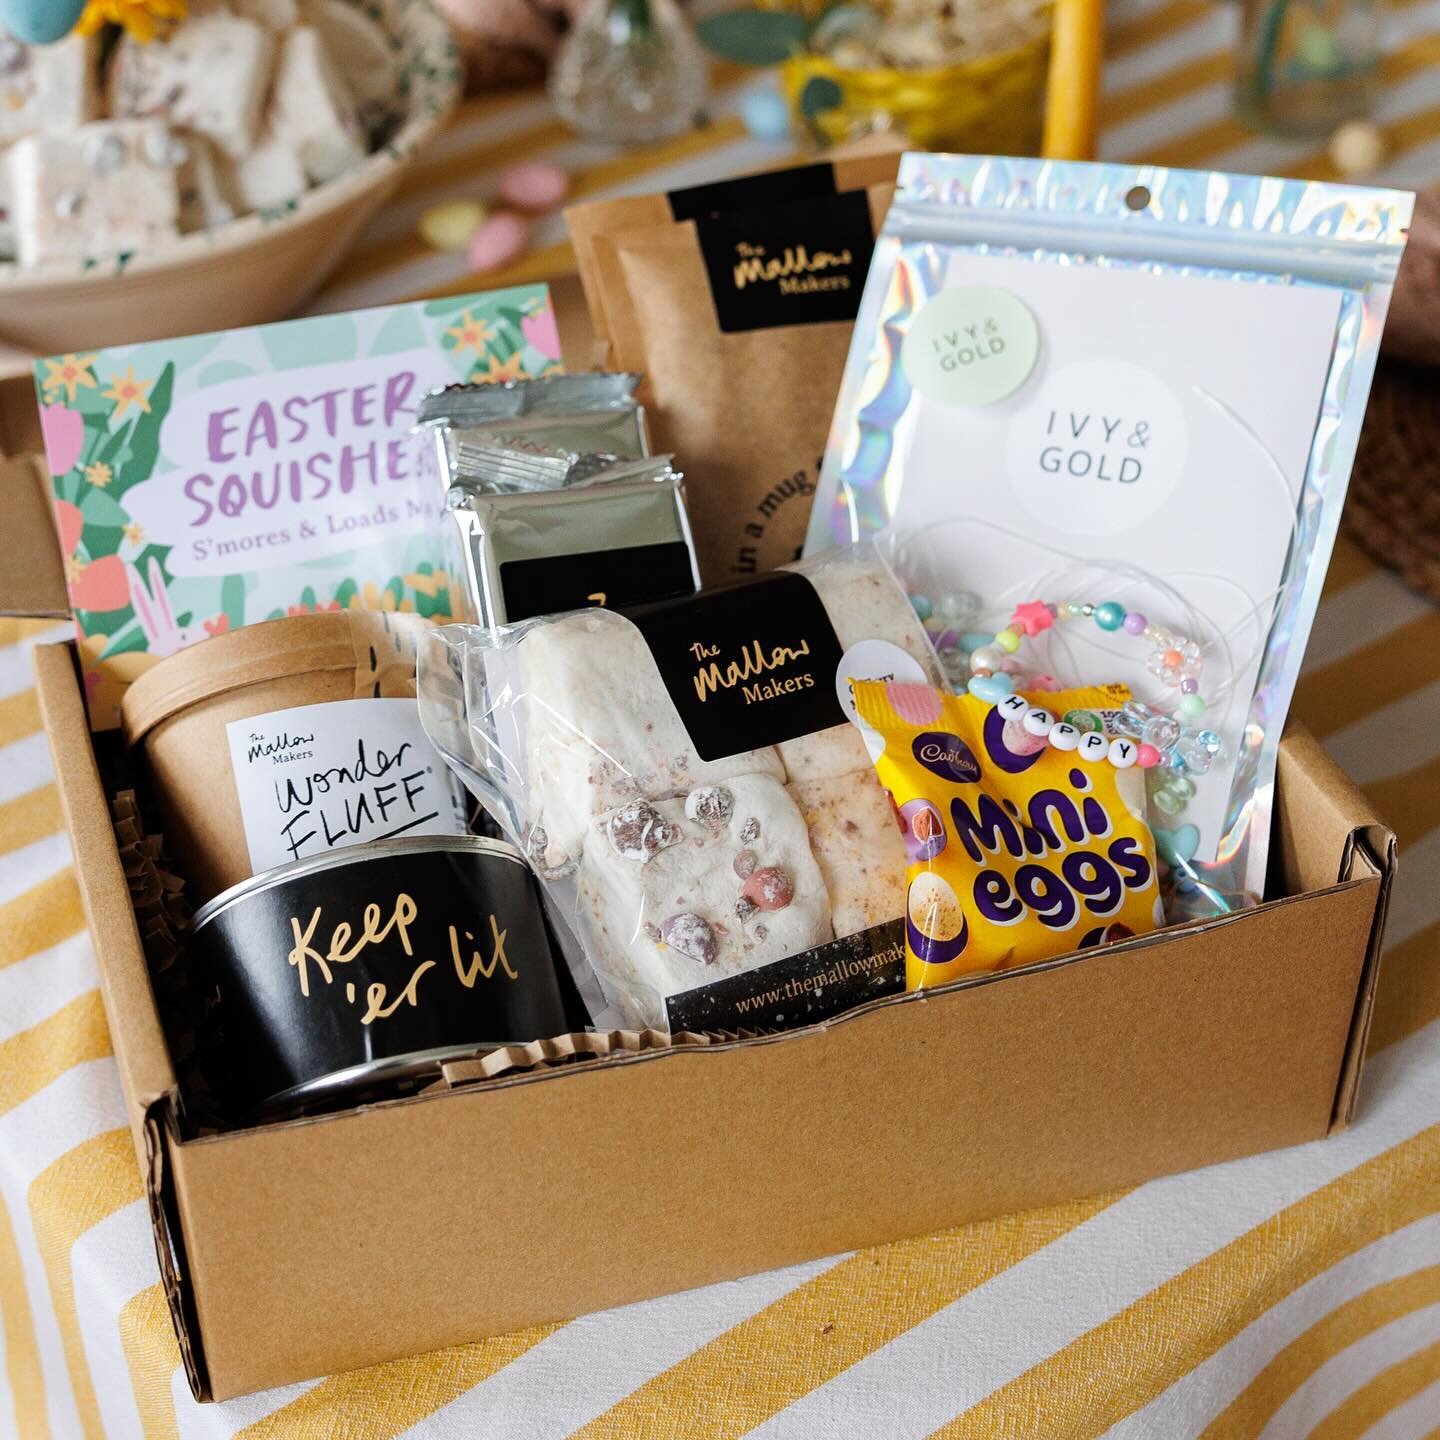 The wait is over! Our Easter Collab Kit with @ivyandgolduk is now available to pre-order. If you know a little person who loves beads, bracelets and deliciously squishy treats then this is the perfect gift to keep their creative little fingers busy o